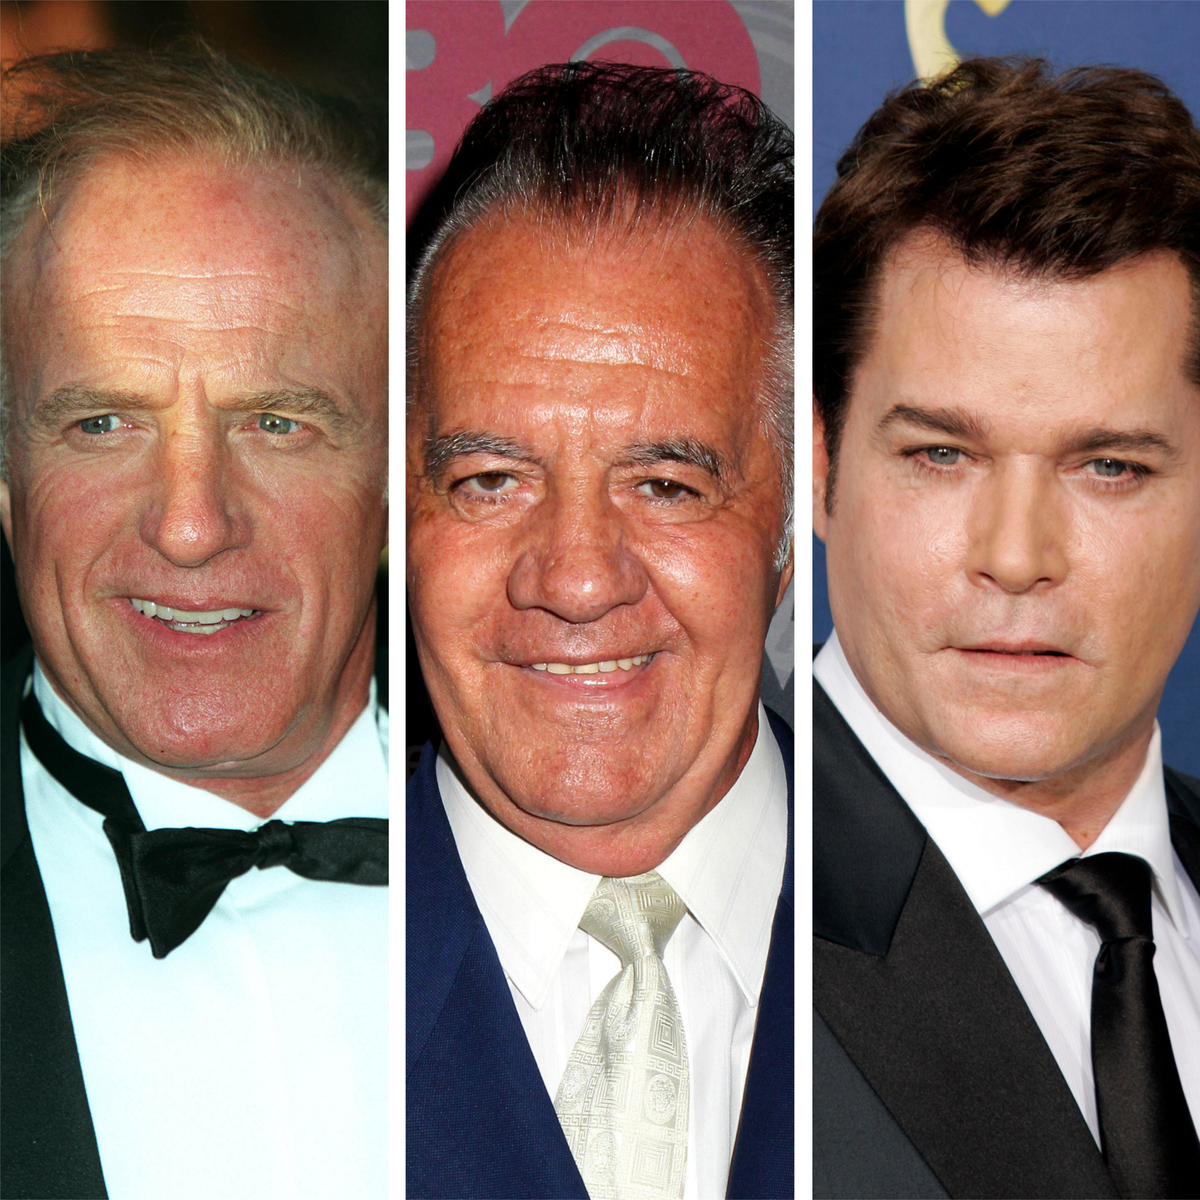 Hollywood mourns the loss of three gangster greats: Sirico, Caan and Liotta